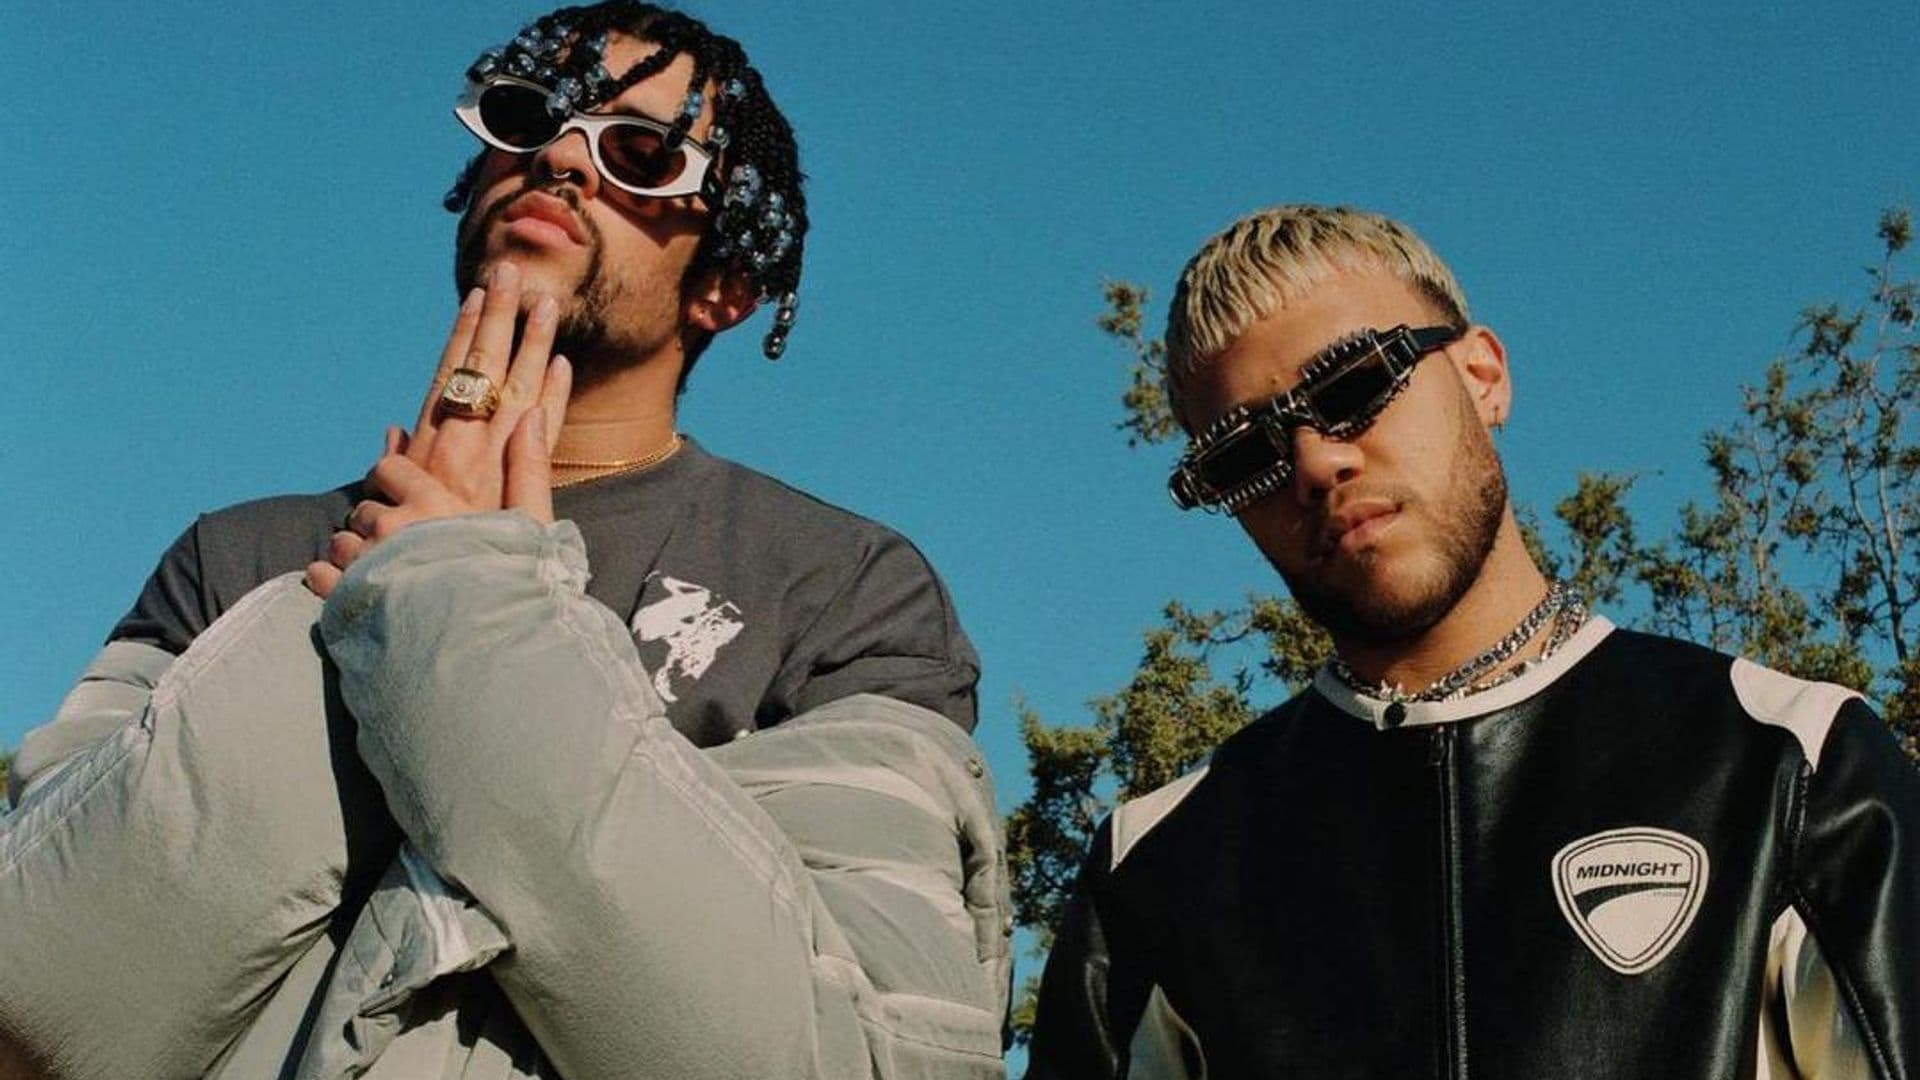 Bad Bunny and Jhay Cortez team up for entrancing new single “Dákiti”